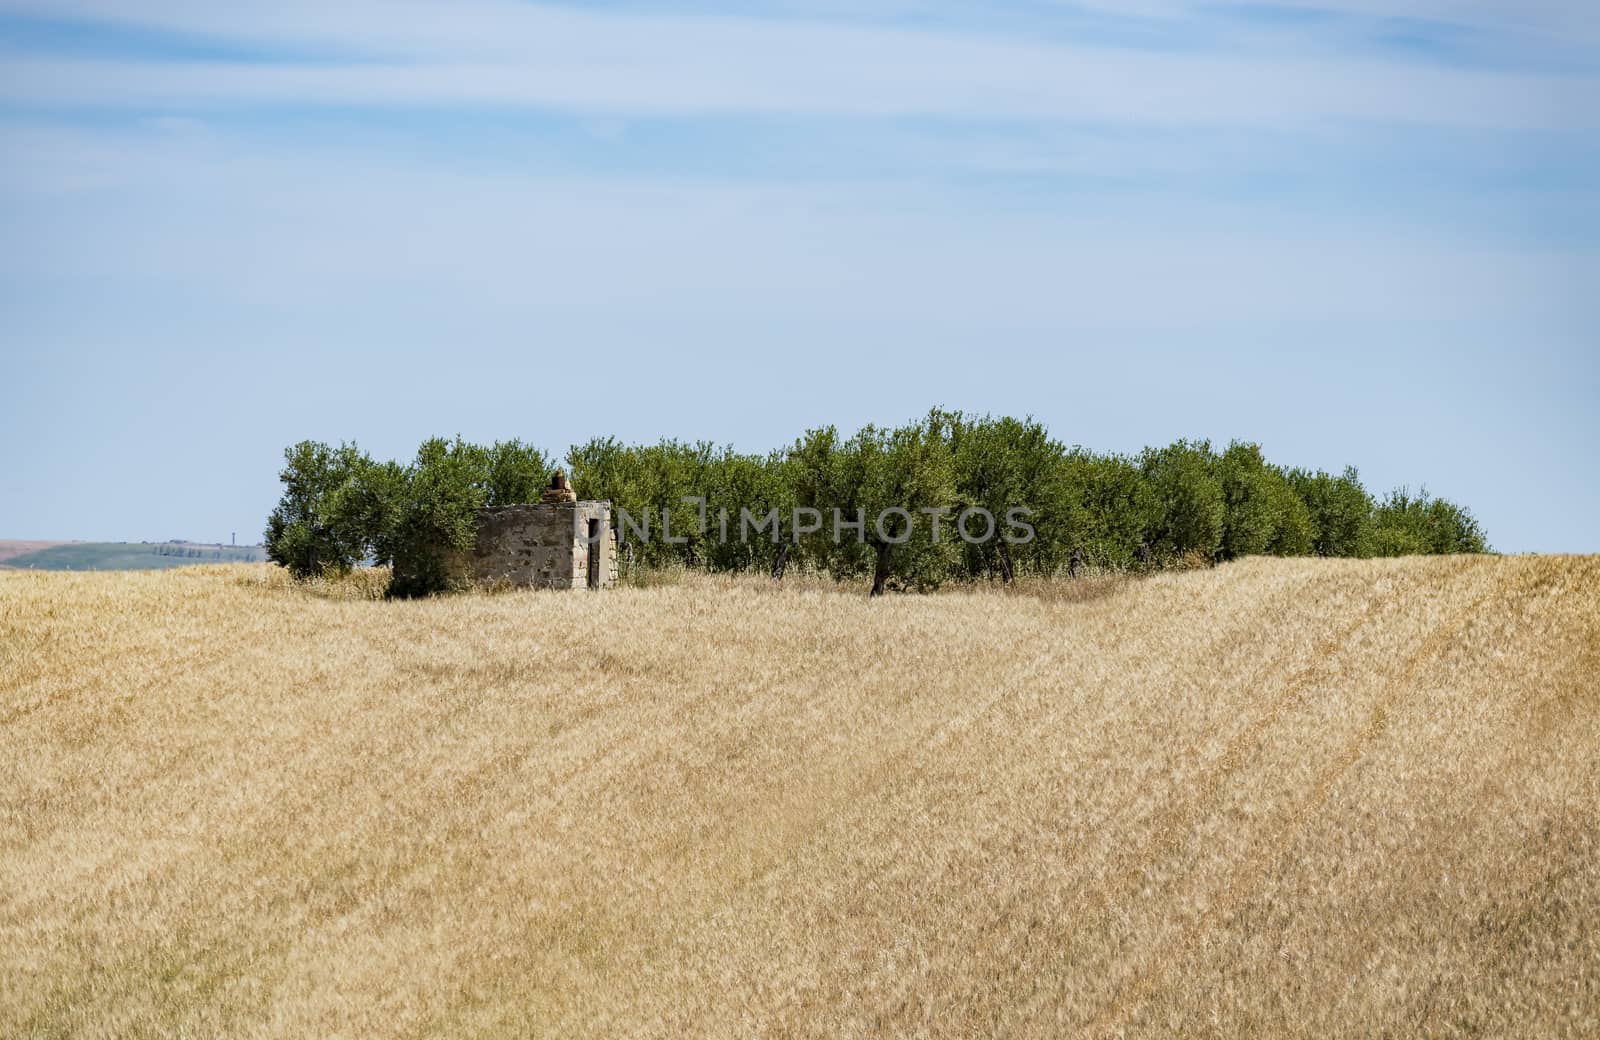 Hilly landscape with wheat field and trees in a typical landscape in Basilicata, Italy